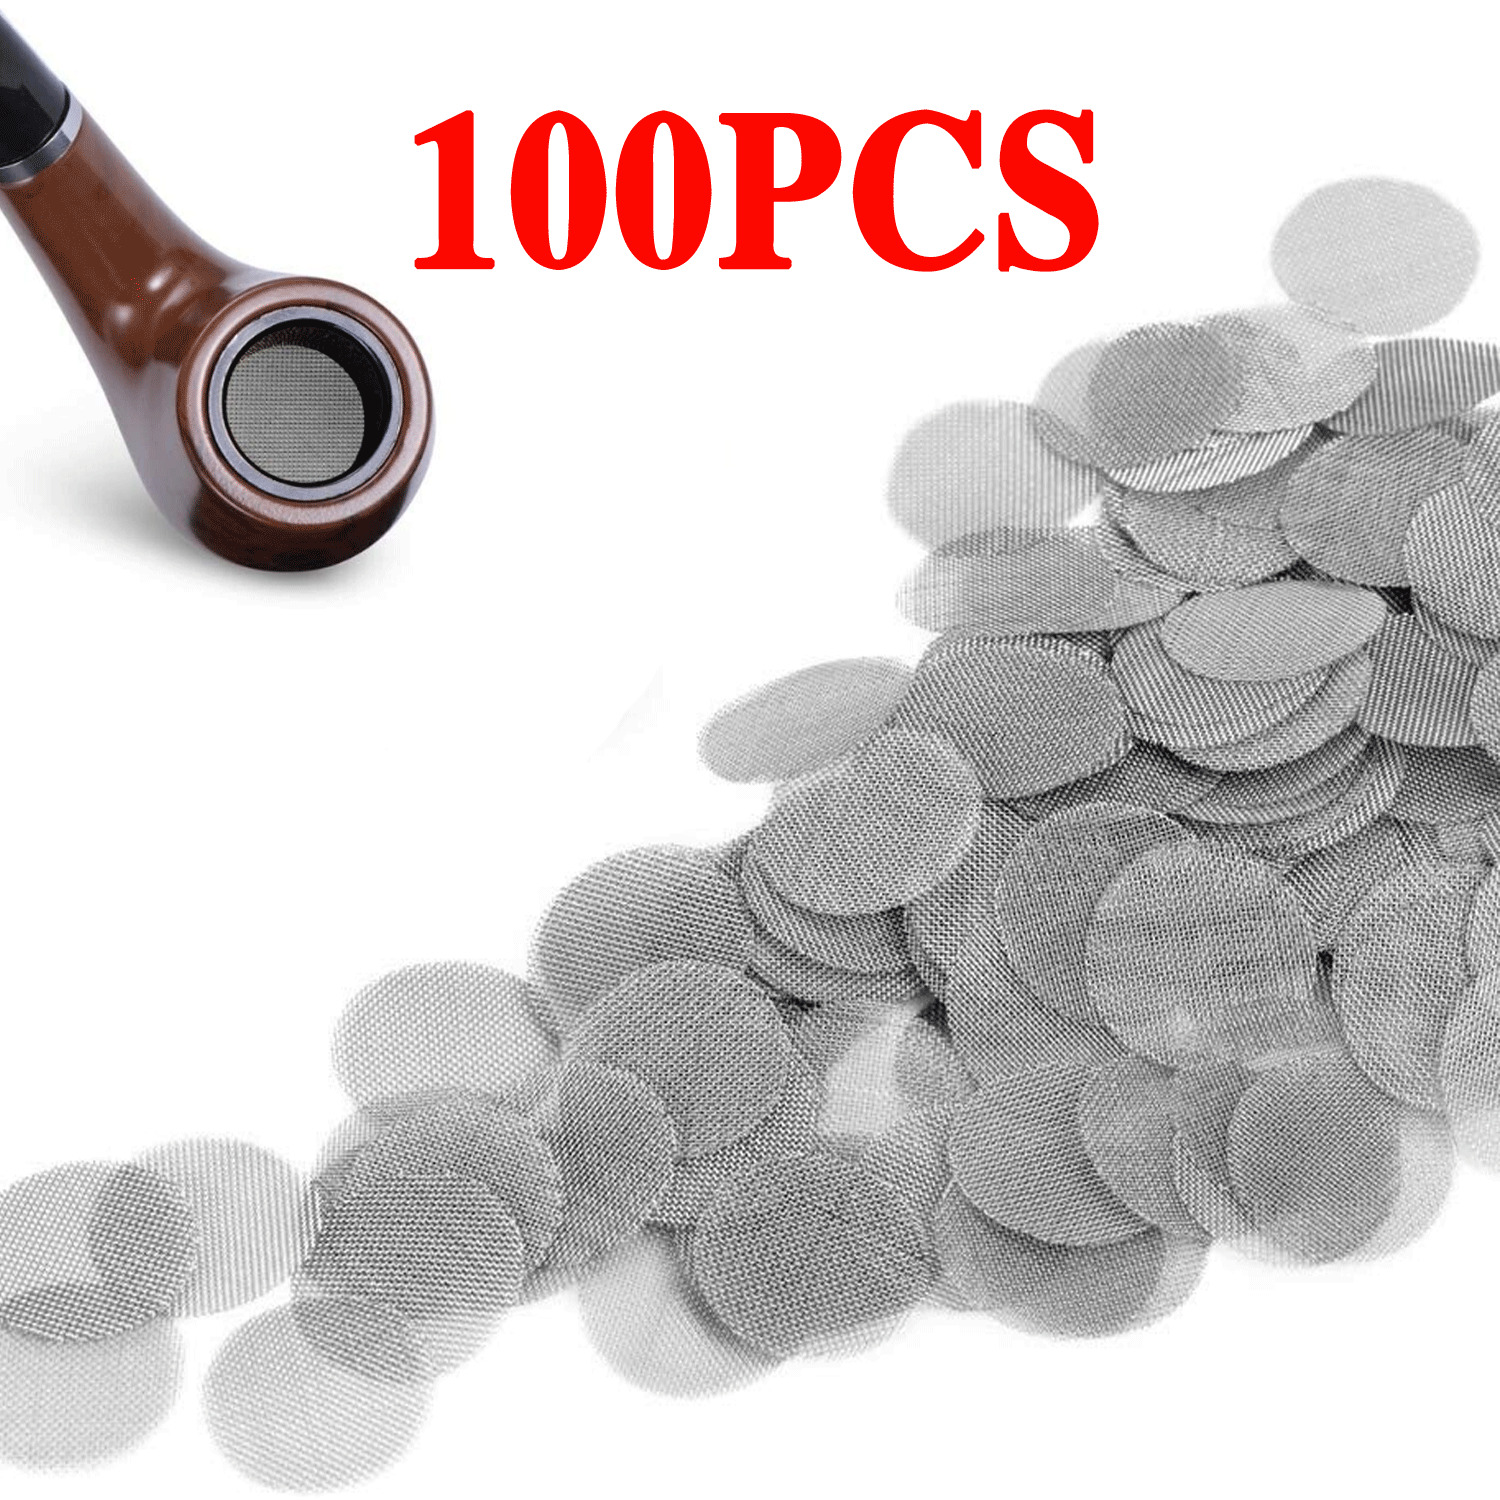 100 pcs Pipe Screens Stainless Steel Metal Tobacco Smoking Pipe Filters 3/4 Inch